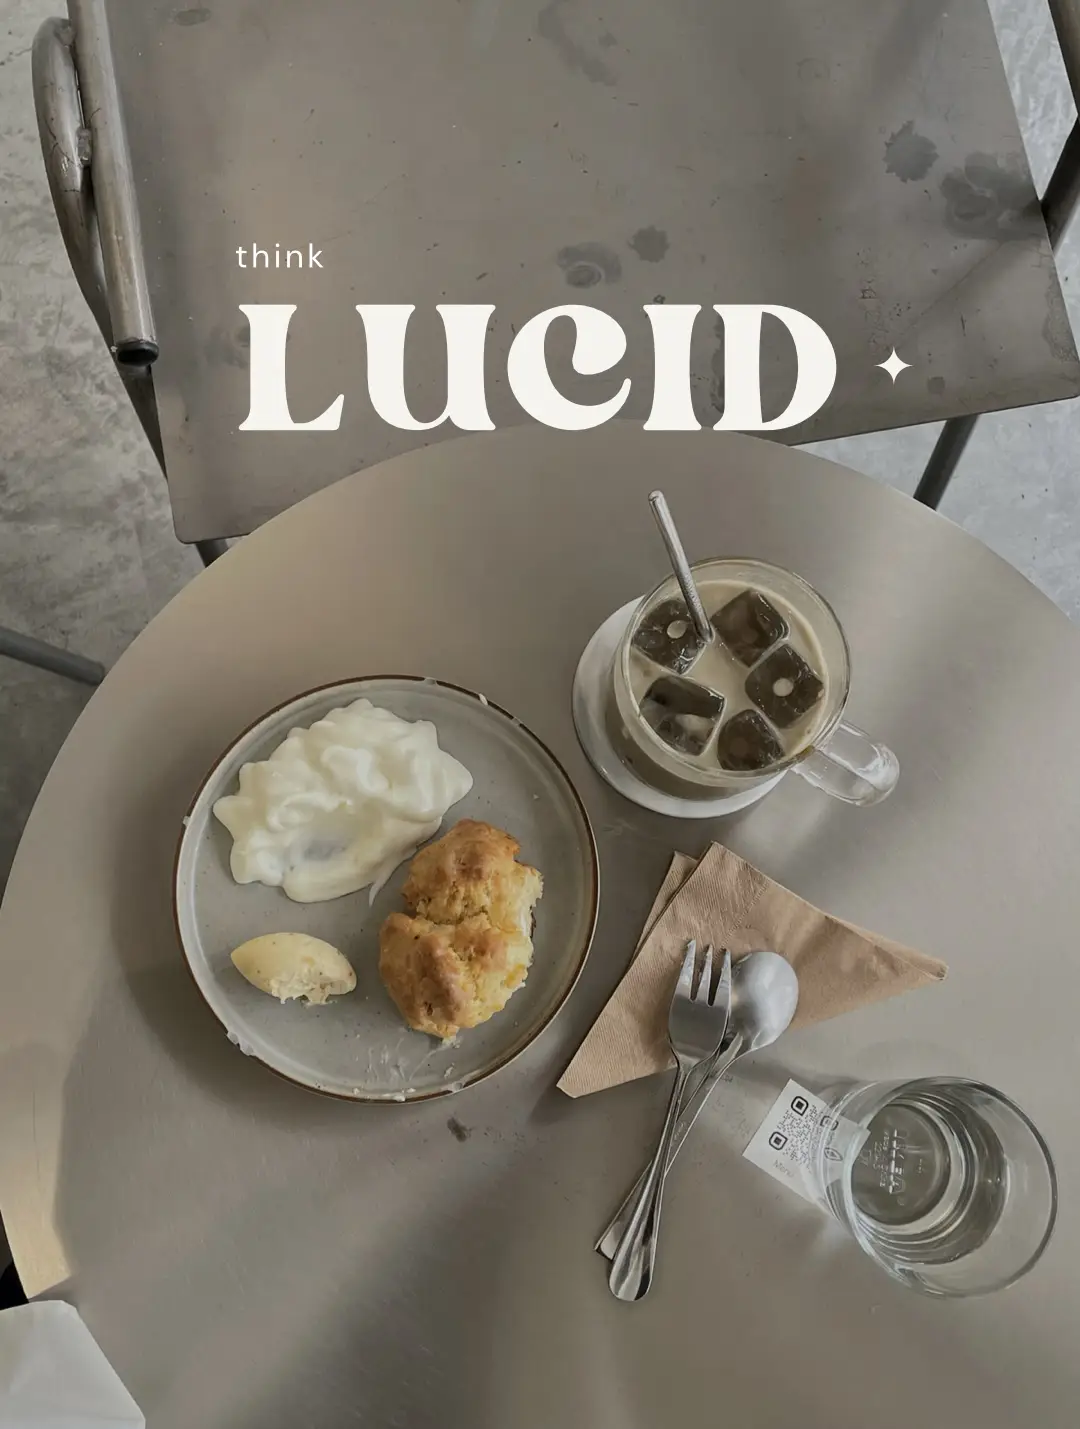 LUCID CAFÉ — an oldie but a goodie's images(0)